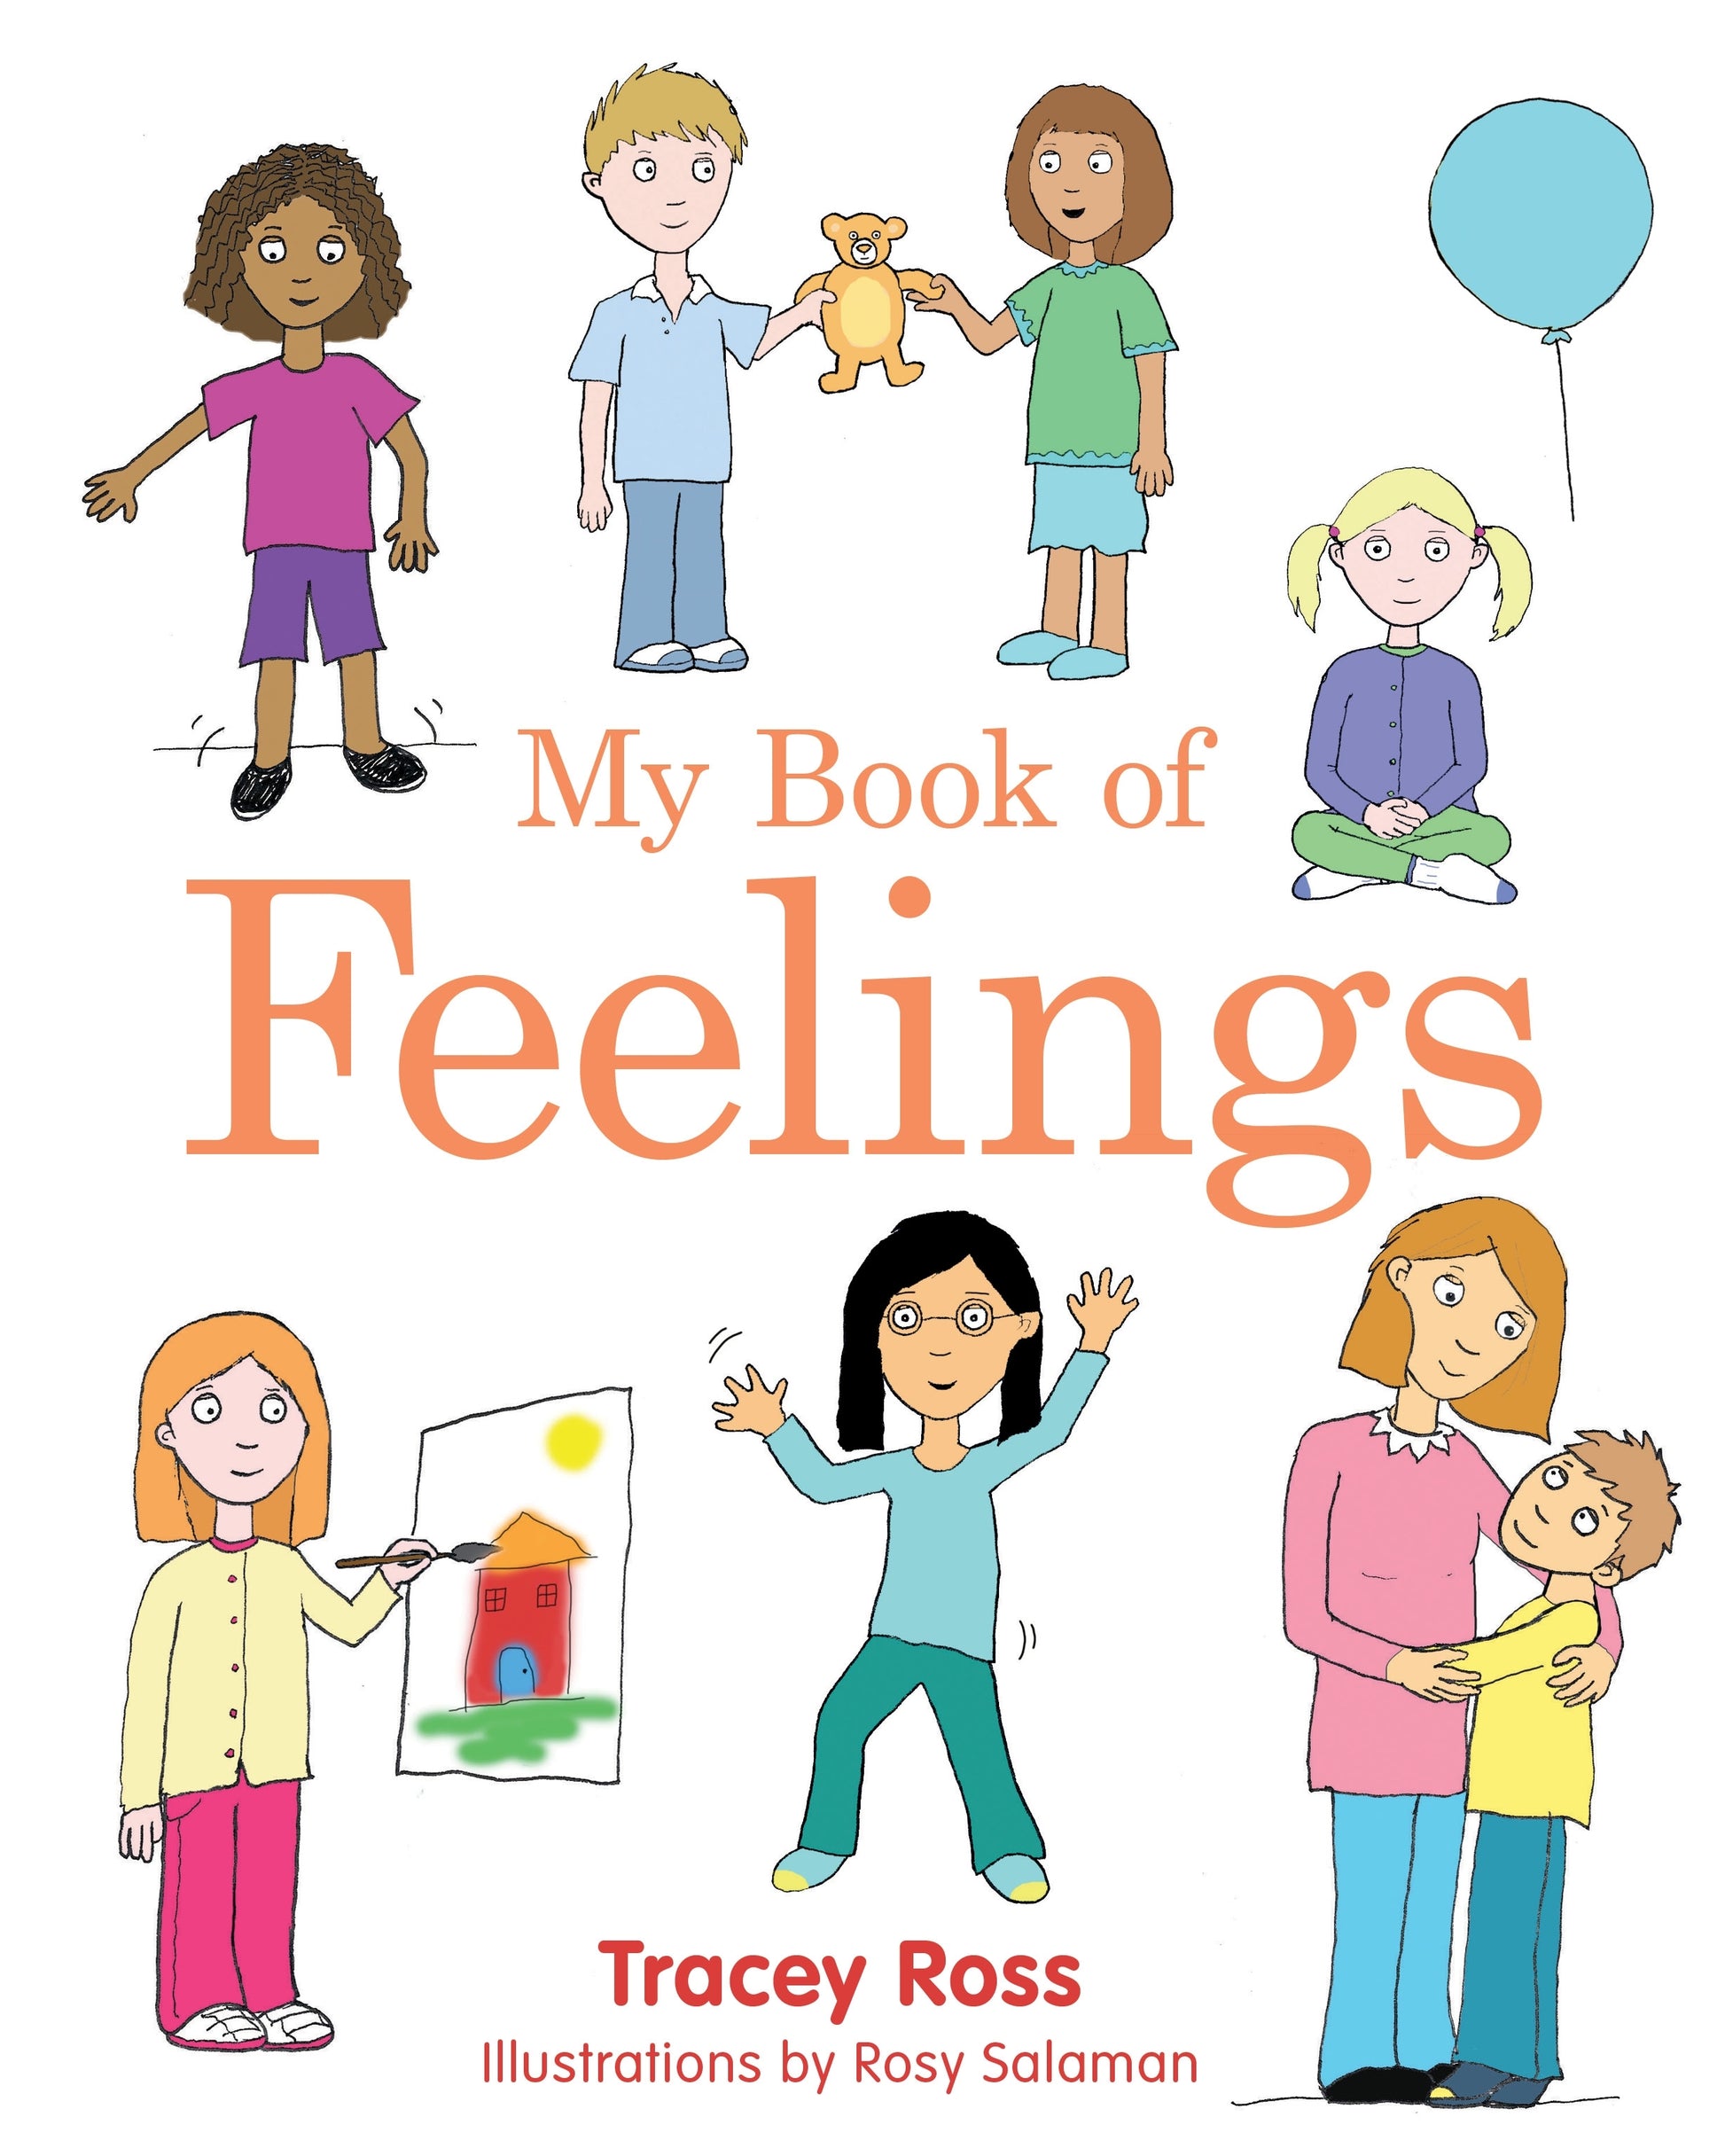 My Book of Feelings by Tracey Ross, Rosy Salaman